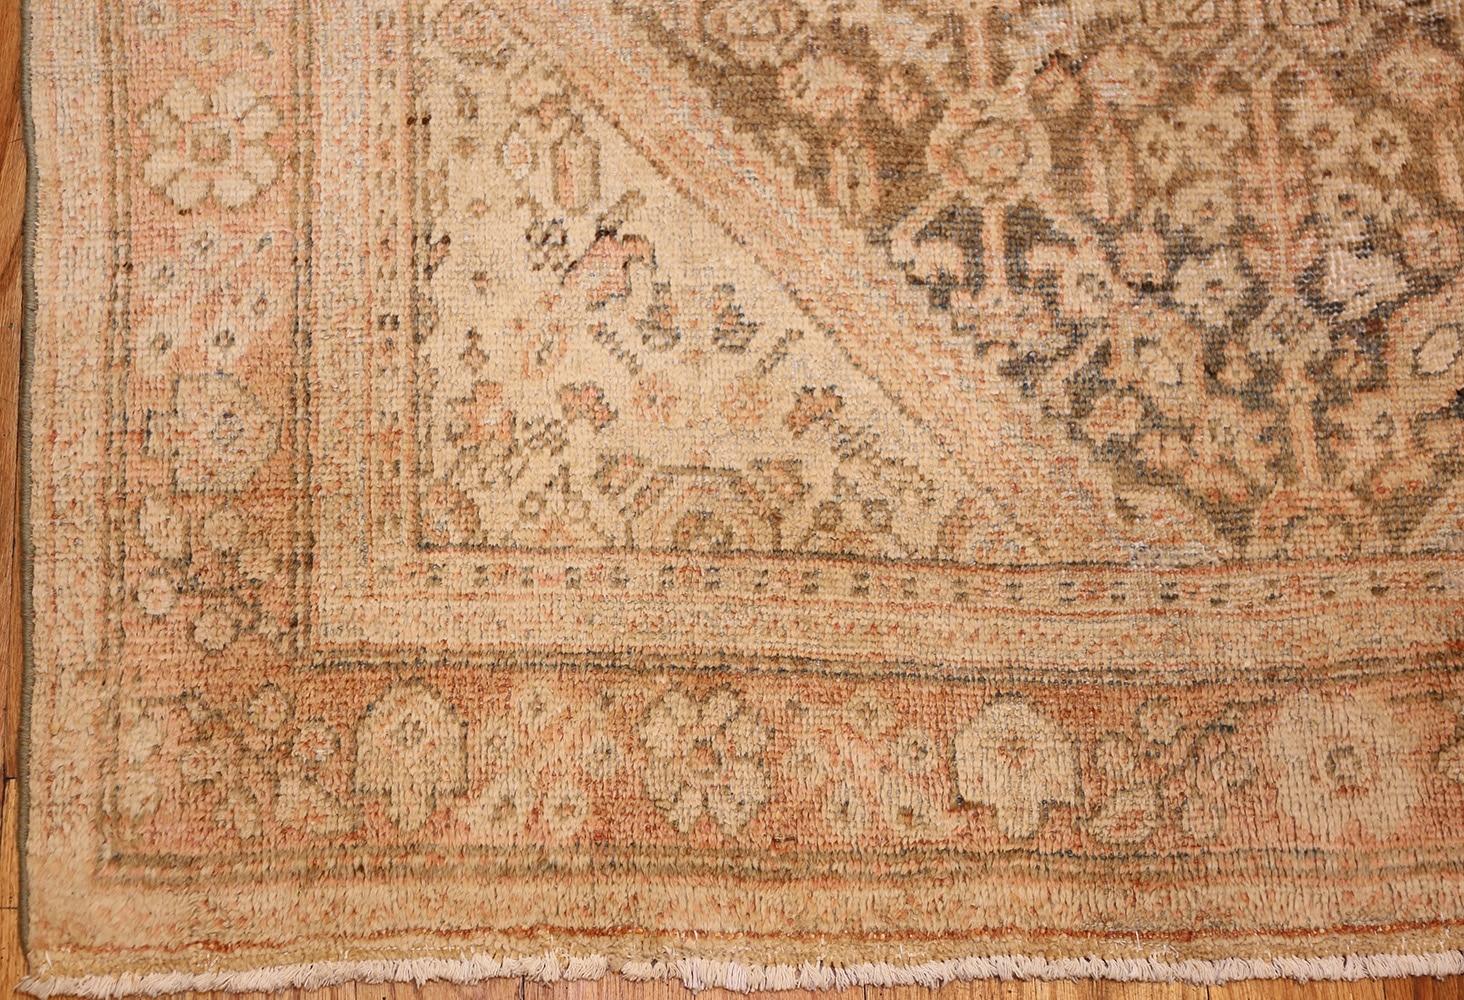 Small size antique Persian Mahal rug, country of origin: Persia, circa date 1920 -- Size: 4 ft 4 in x 6 ft 10 in (1.32 m x 2.08 m) 

In this particular small scatter size antique Persian Mahal rug, the simple decorative color palette allows the